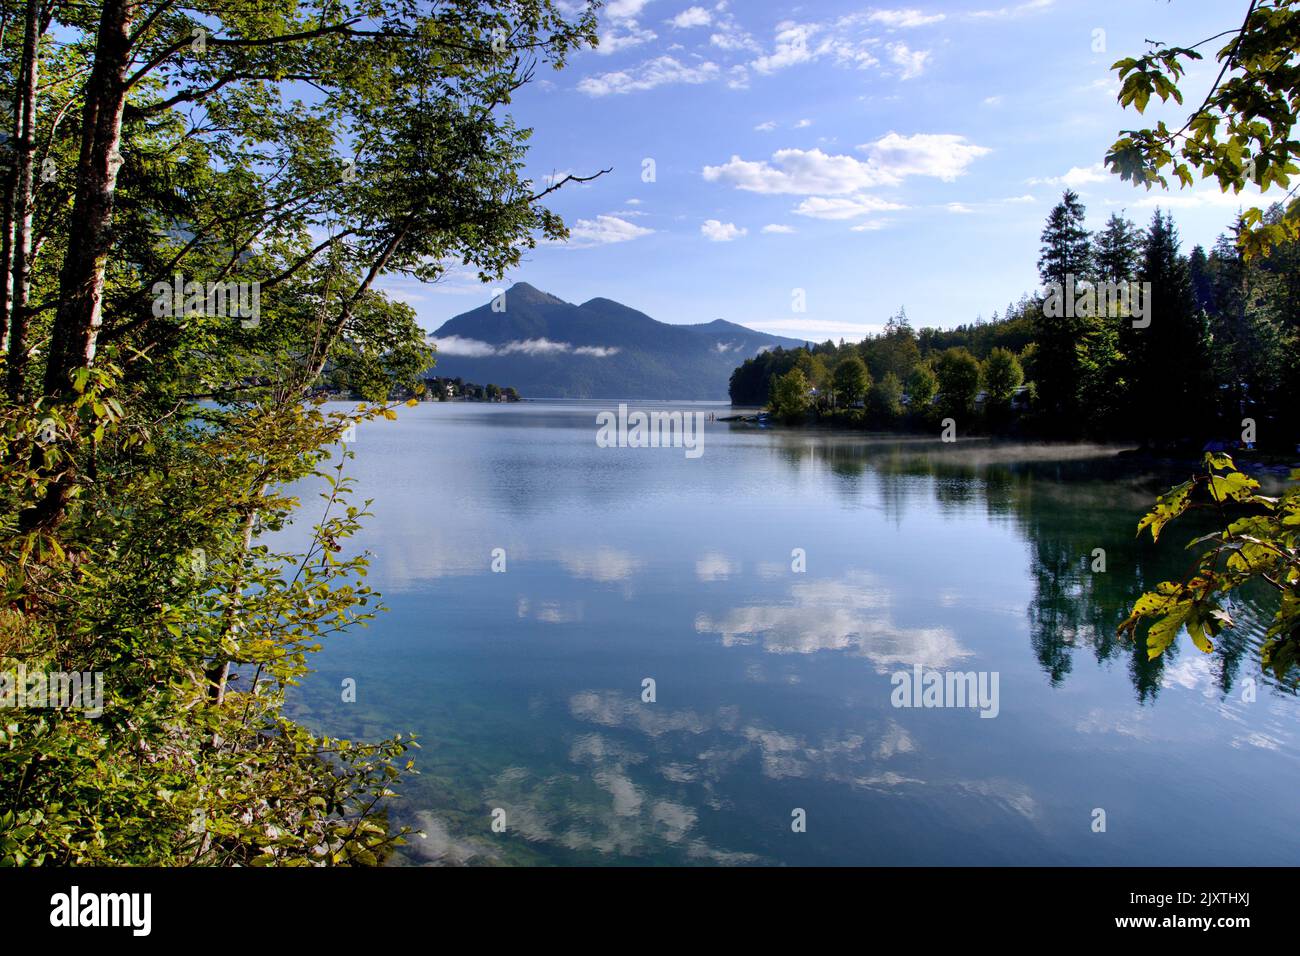 Landscape in Bavaria, lake in front of mountains Stock Photo